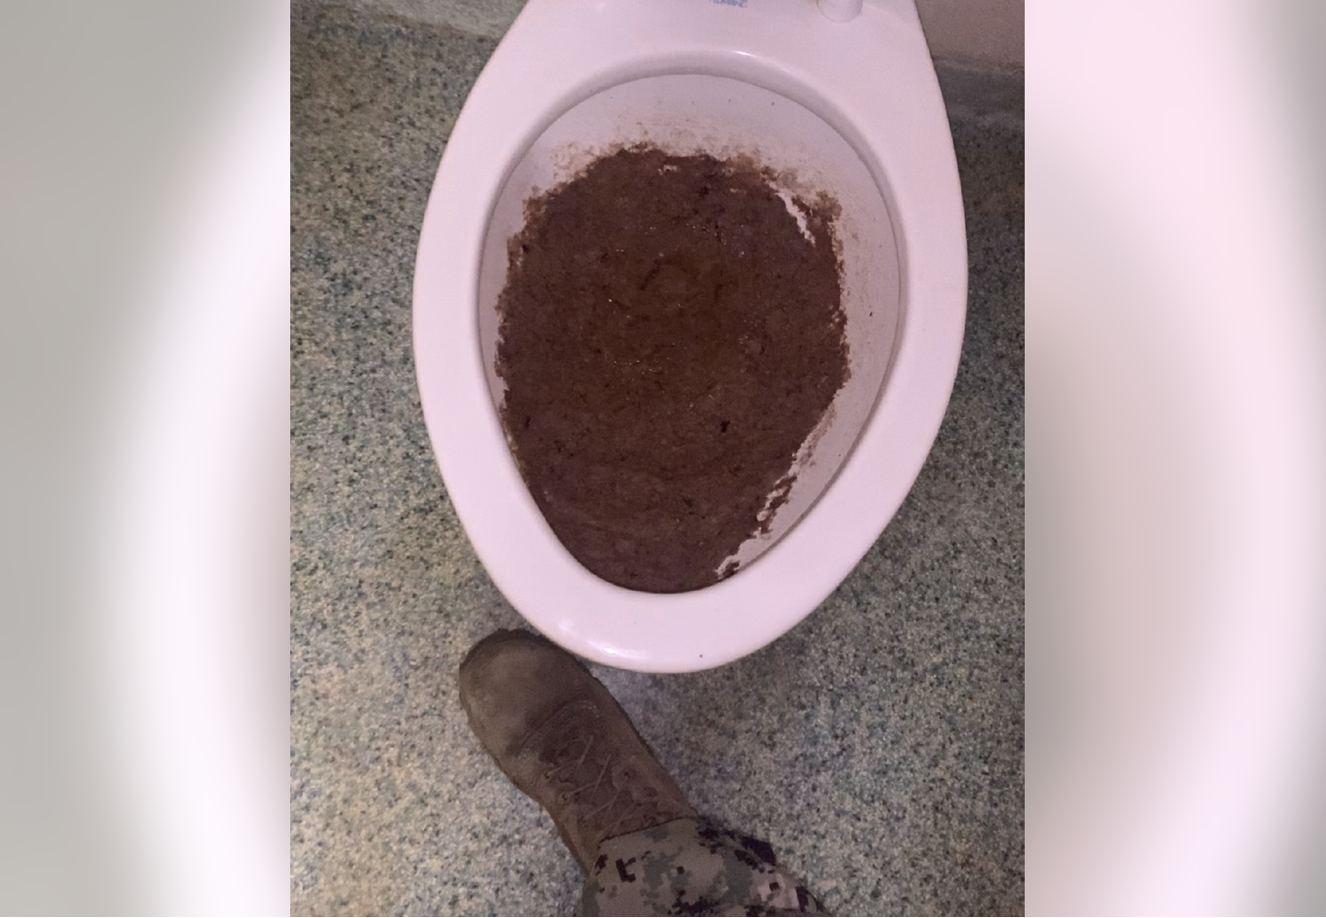 filthy toilet in military barracks